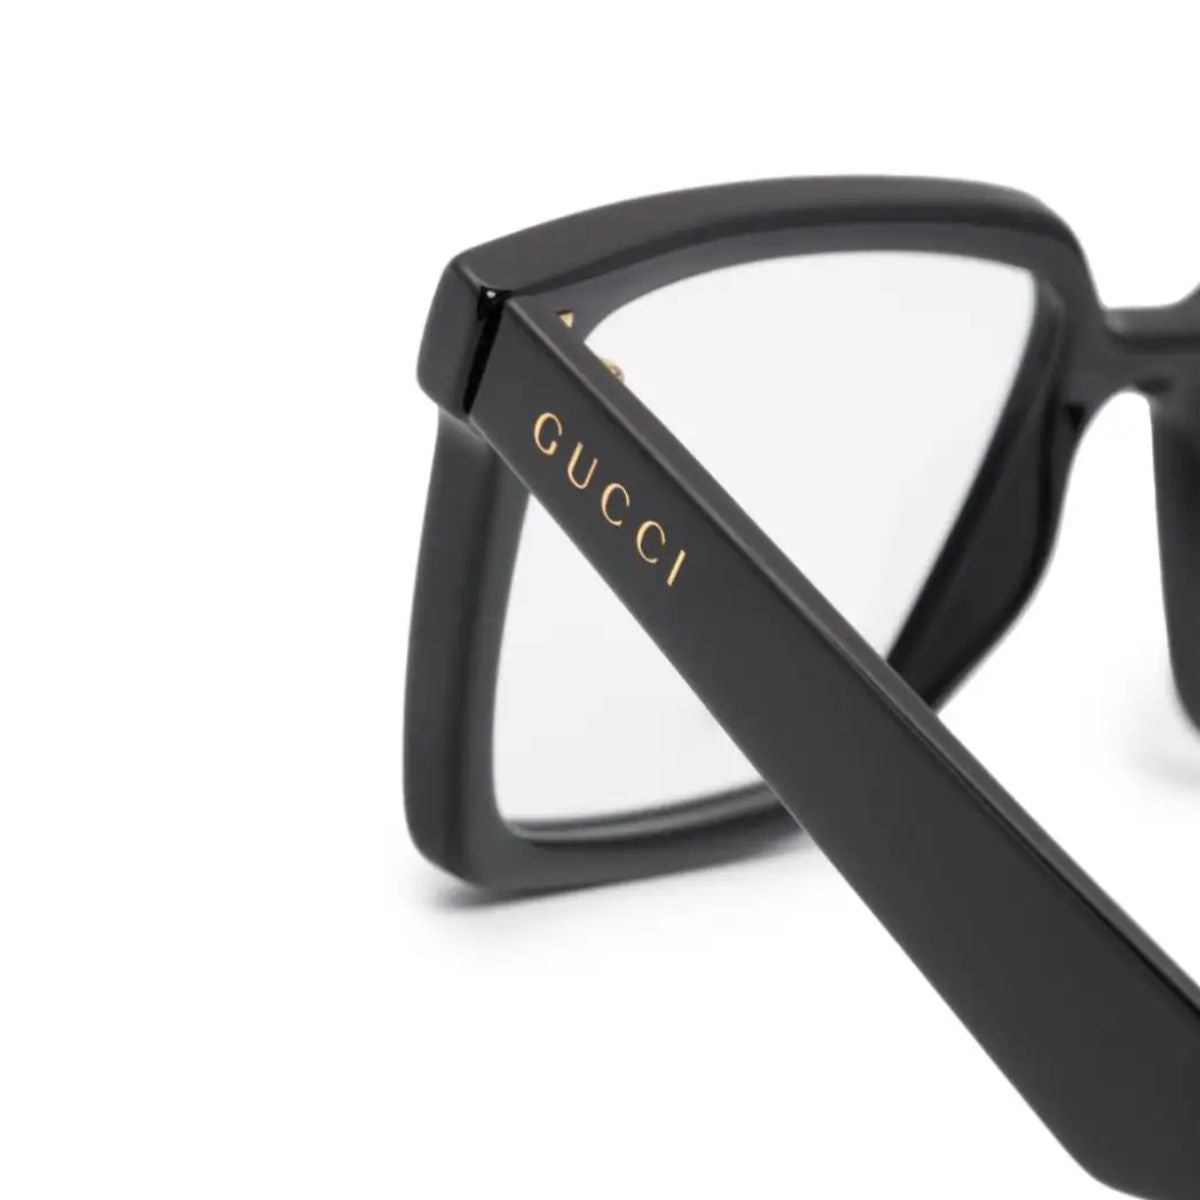 "Gucci 1540O 001 men's designer frame by Optorium, showcasing luxury and sophistication."